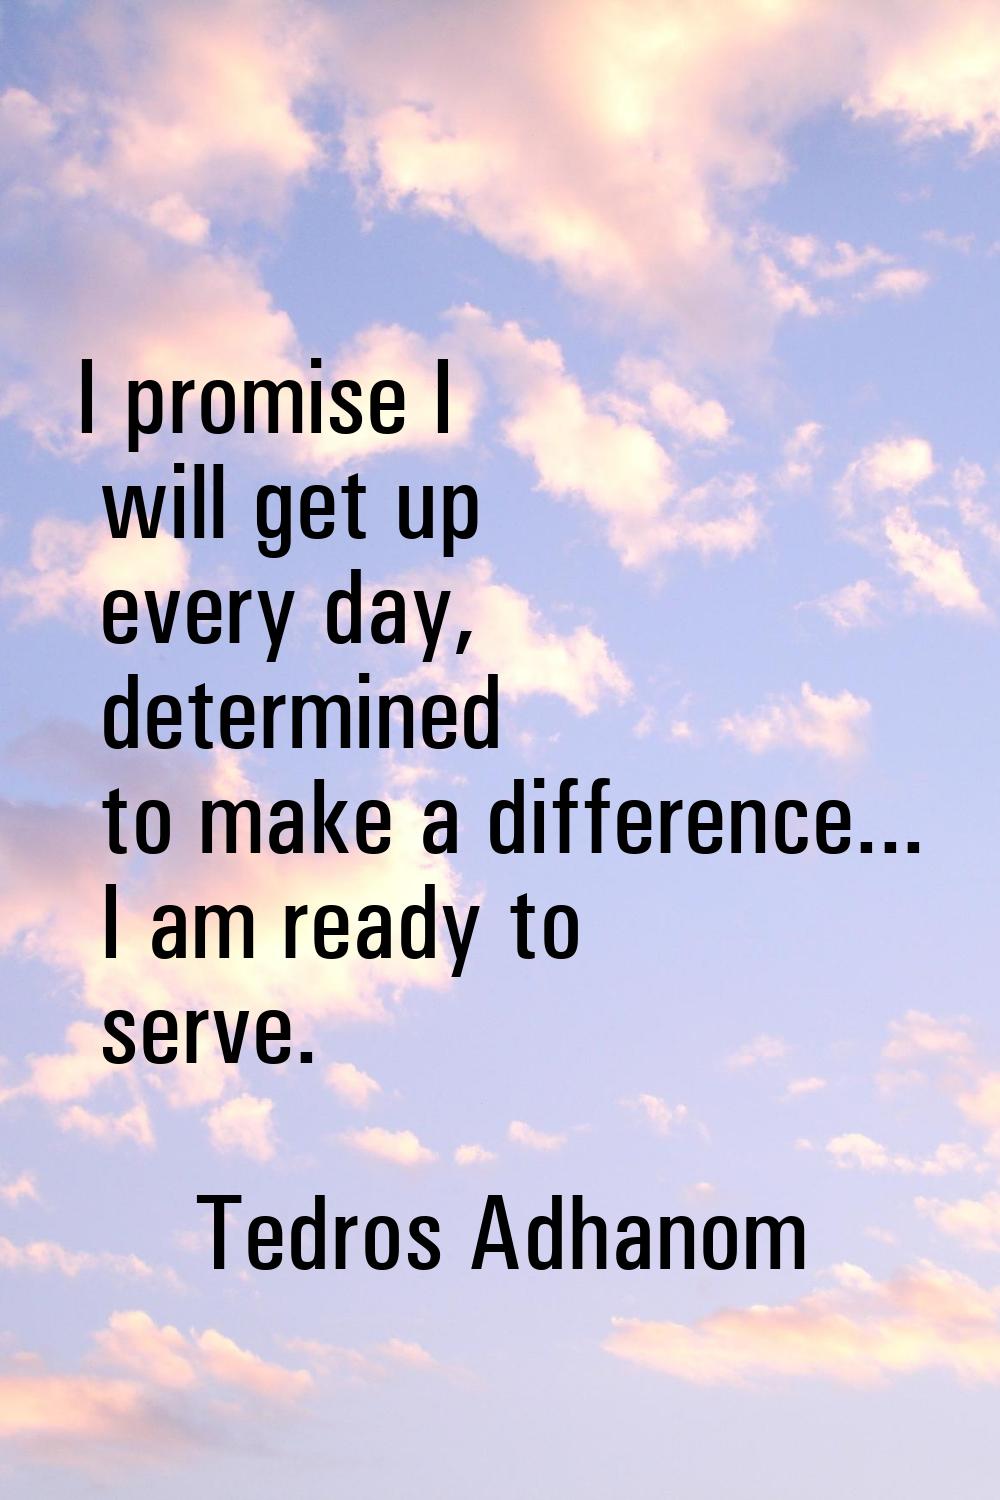 I promise I will get up every day, determined to make a difference... I am ready to serve.